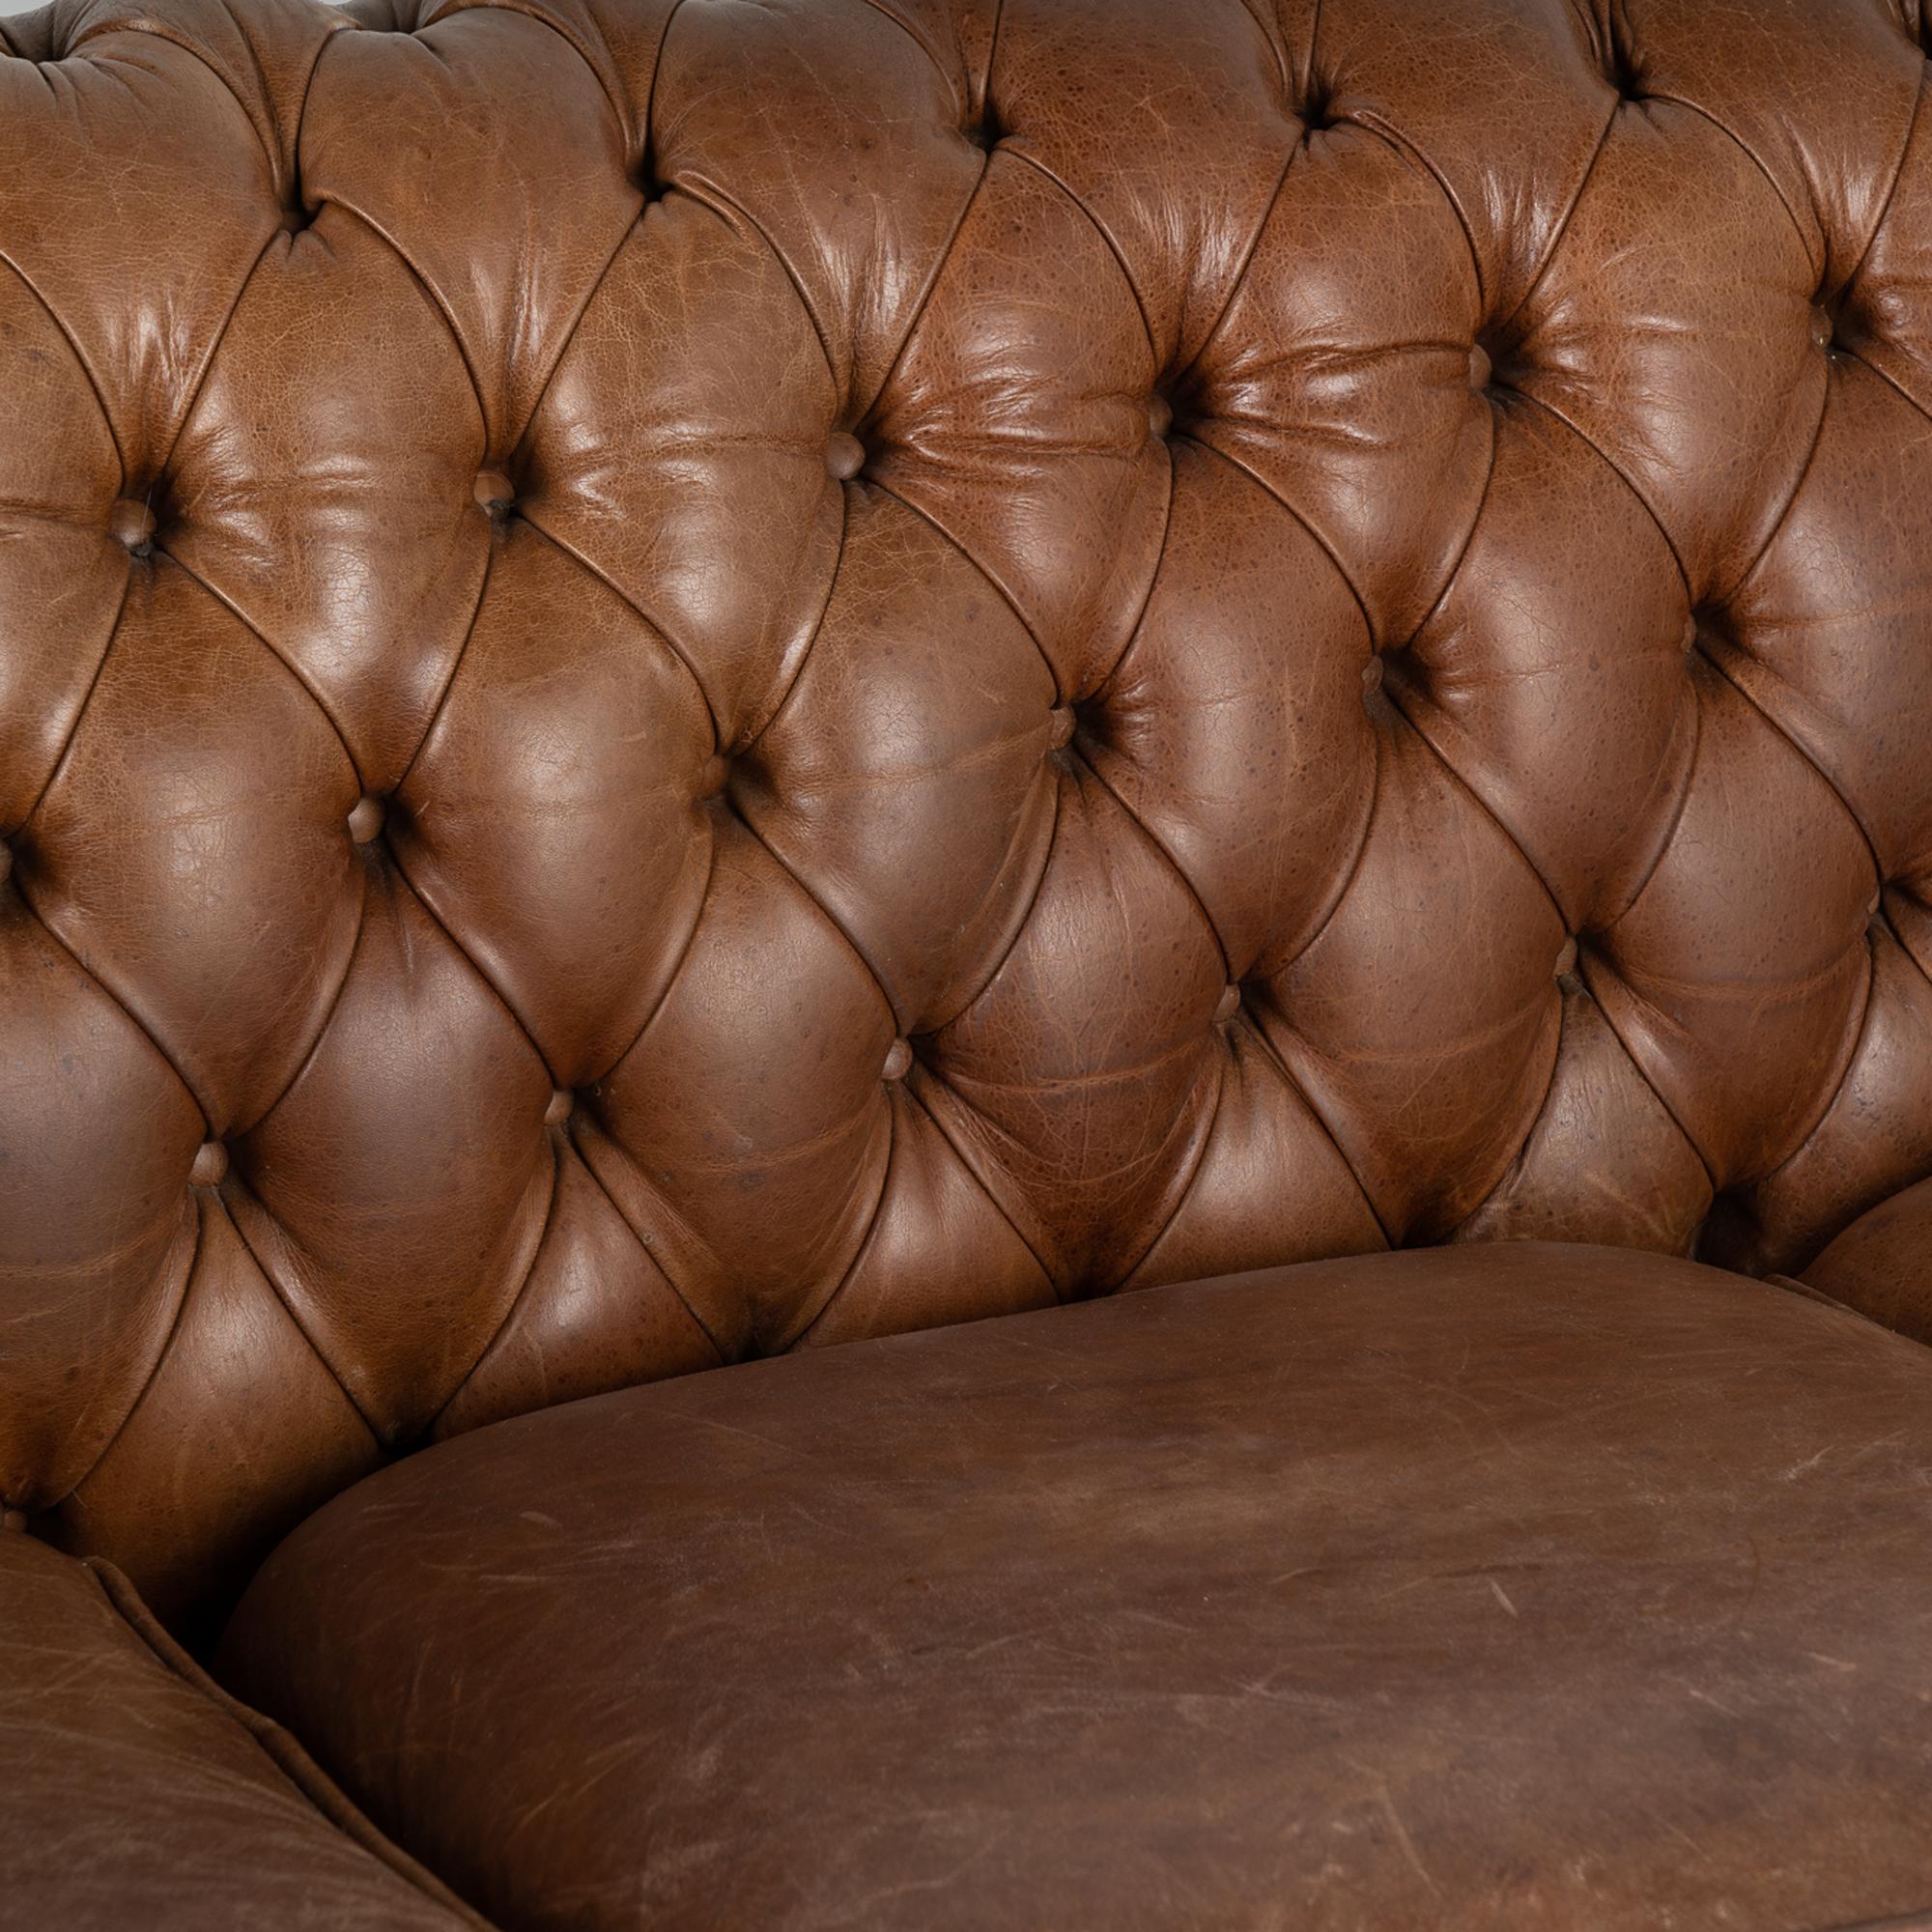 Vintage Brown Leather Three Seat Chesterfield Sofa, Denmark circa 1960-70 For Sale 2